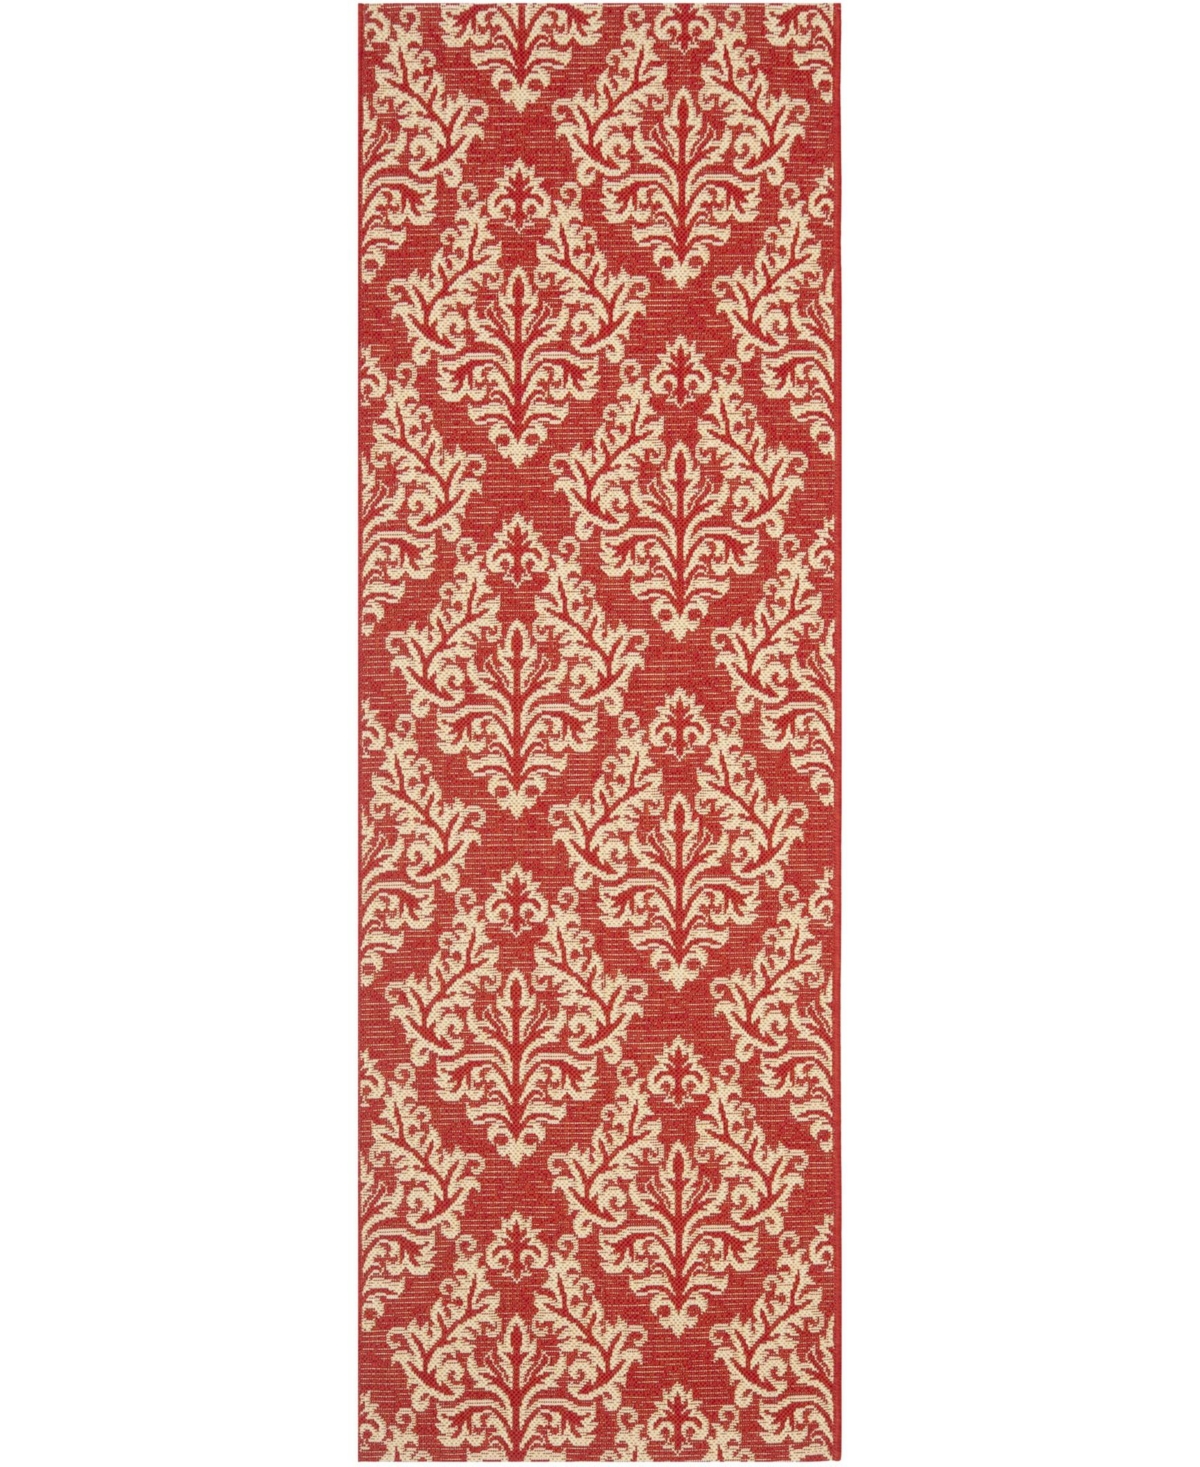 Safavieh Courtyard Cy6930 Red And Creme 2'3" X 6'7" Runner Outdoor Area Rug